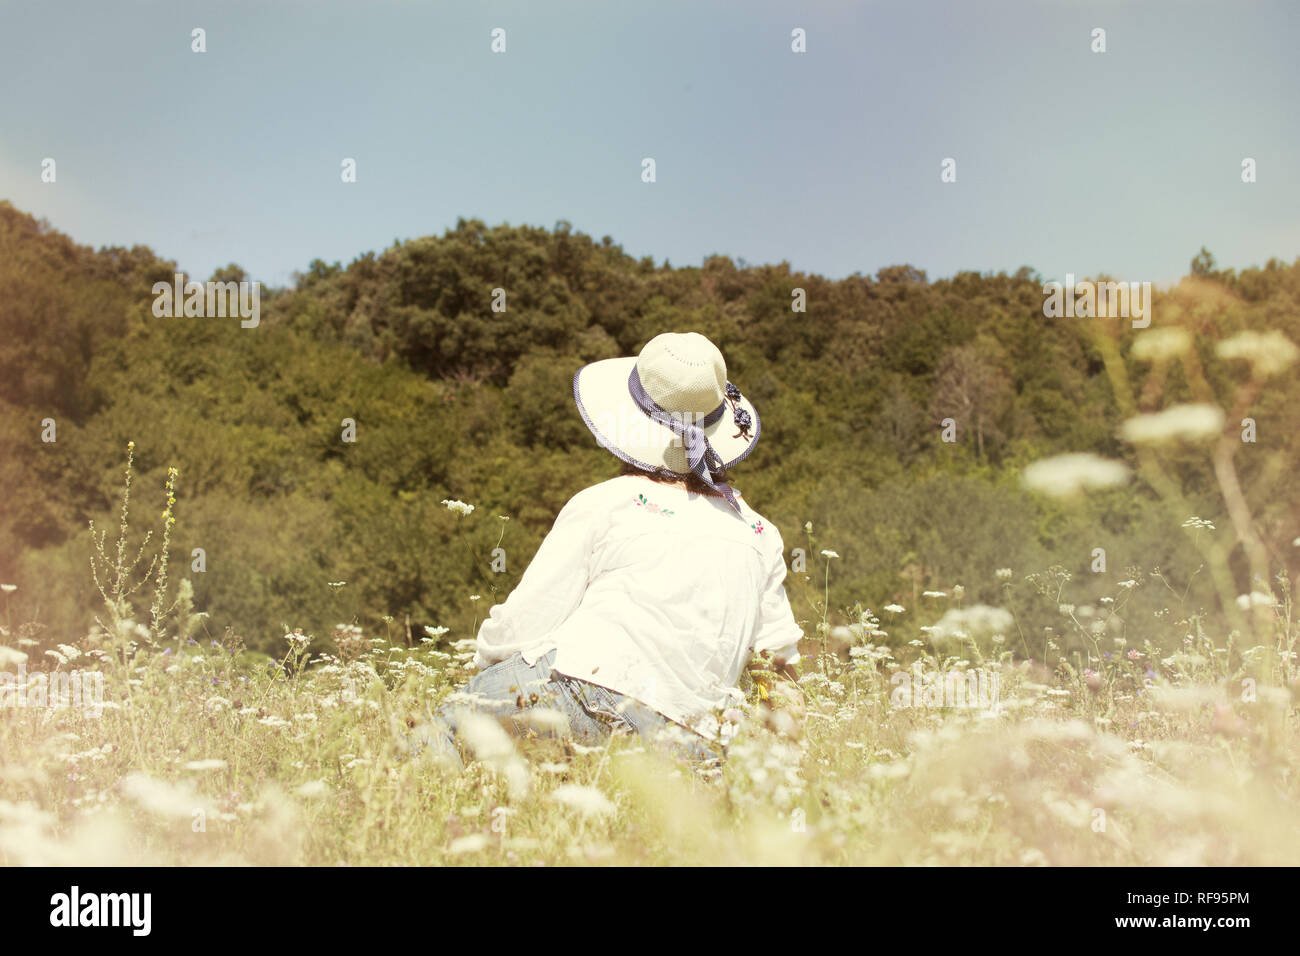 PORTRAIT OF BACWARDS SENIOR WOMAN SITTING ENJOING SPRING LANDSCAPE, WEARING A HAT. Stock Photo